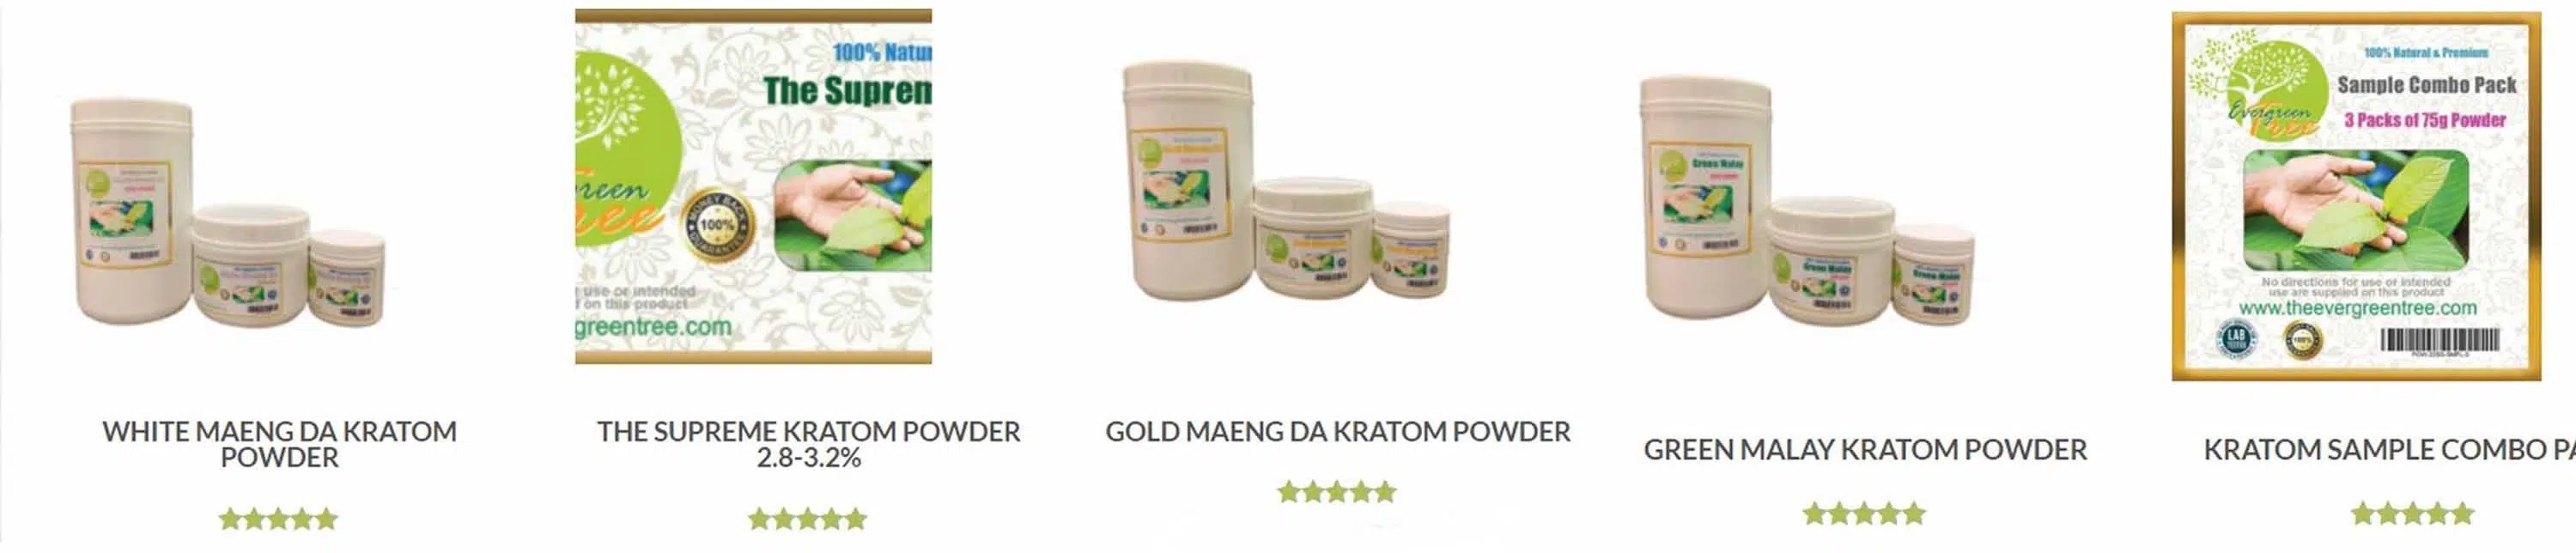 image of the evergreen tree kratom products